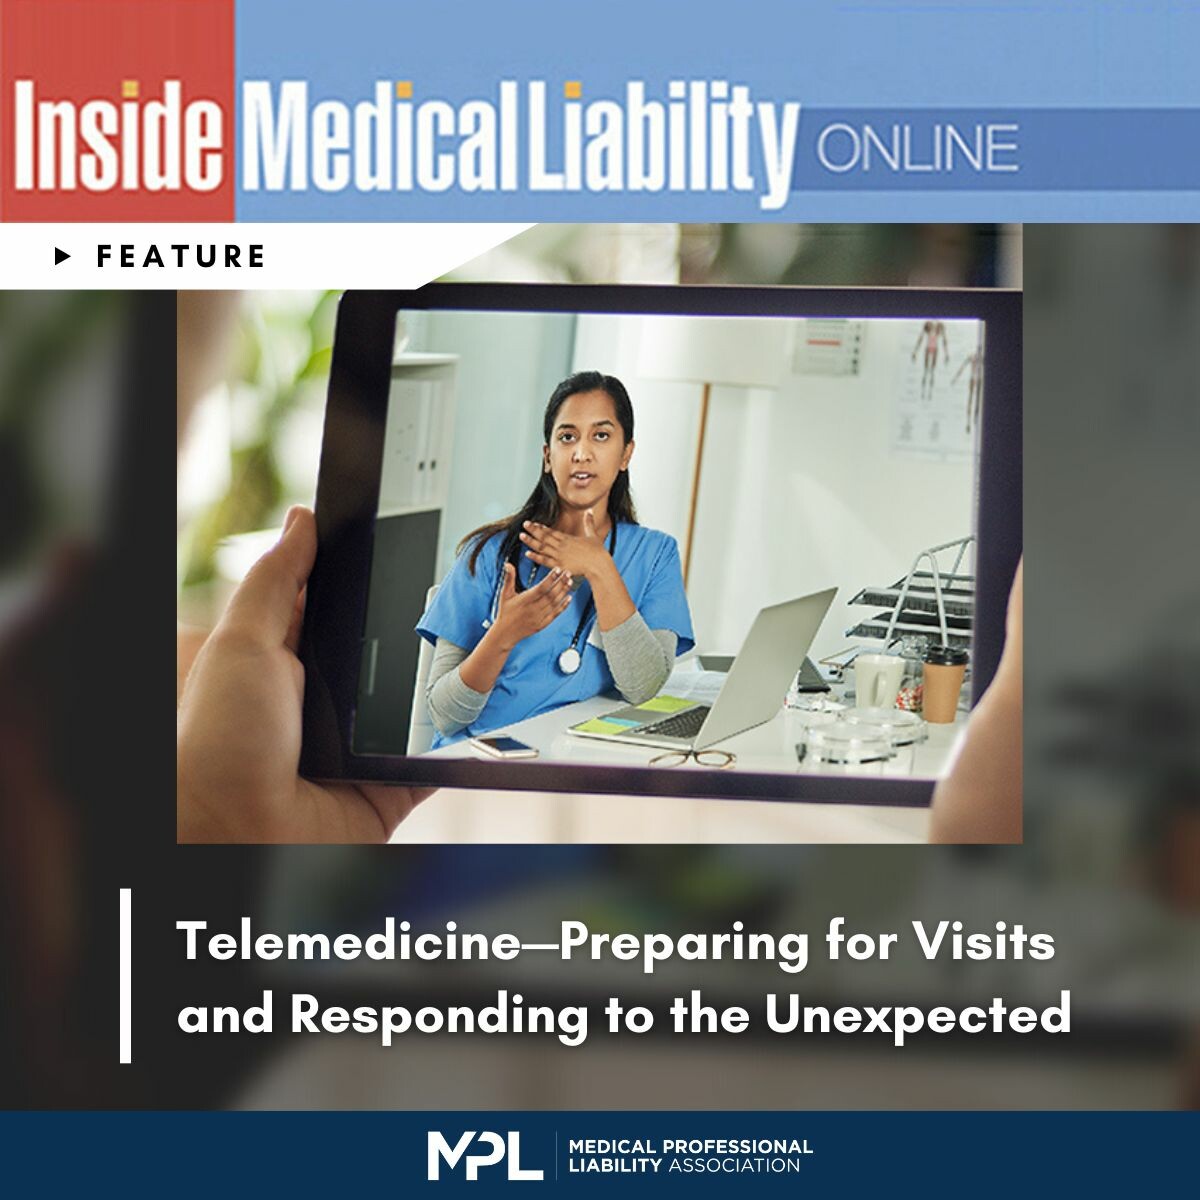 Recent post-pandemic data reveals that telehealth now accounts for 14-17% of all medical visits. Discover why telehealth is set to surge even further in the latest @MPLassociation article authored by CRICO experts Pat Folcarelli and Luke Sato. mplassociation.org/Web/Publicatio…